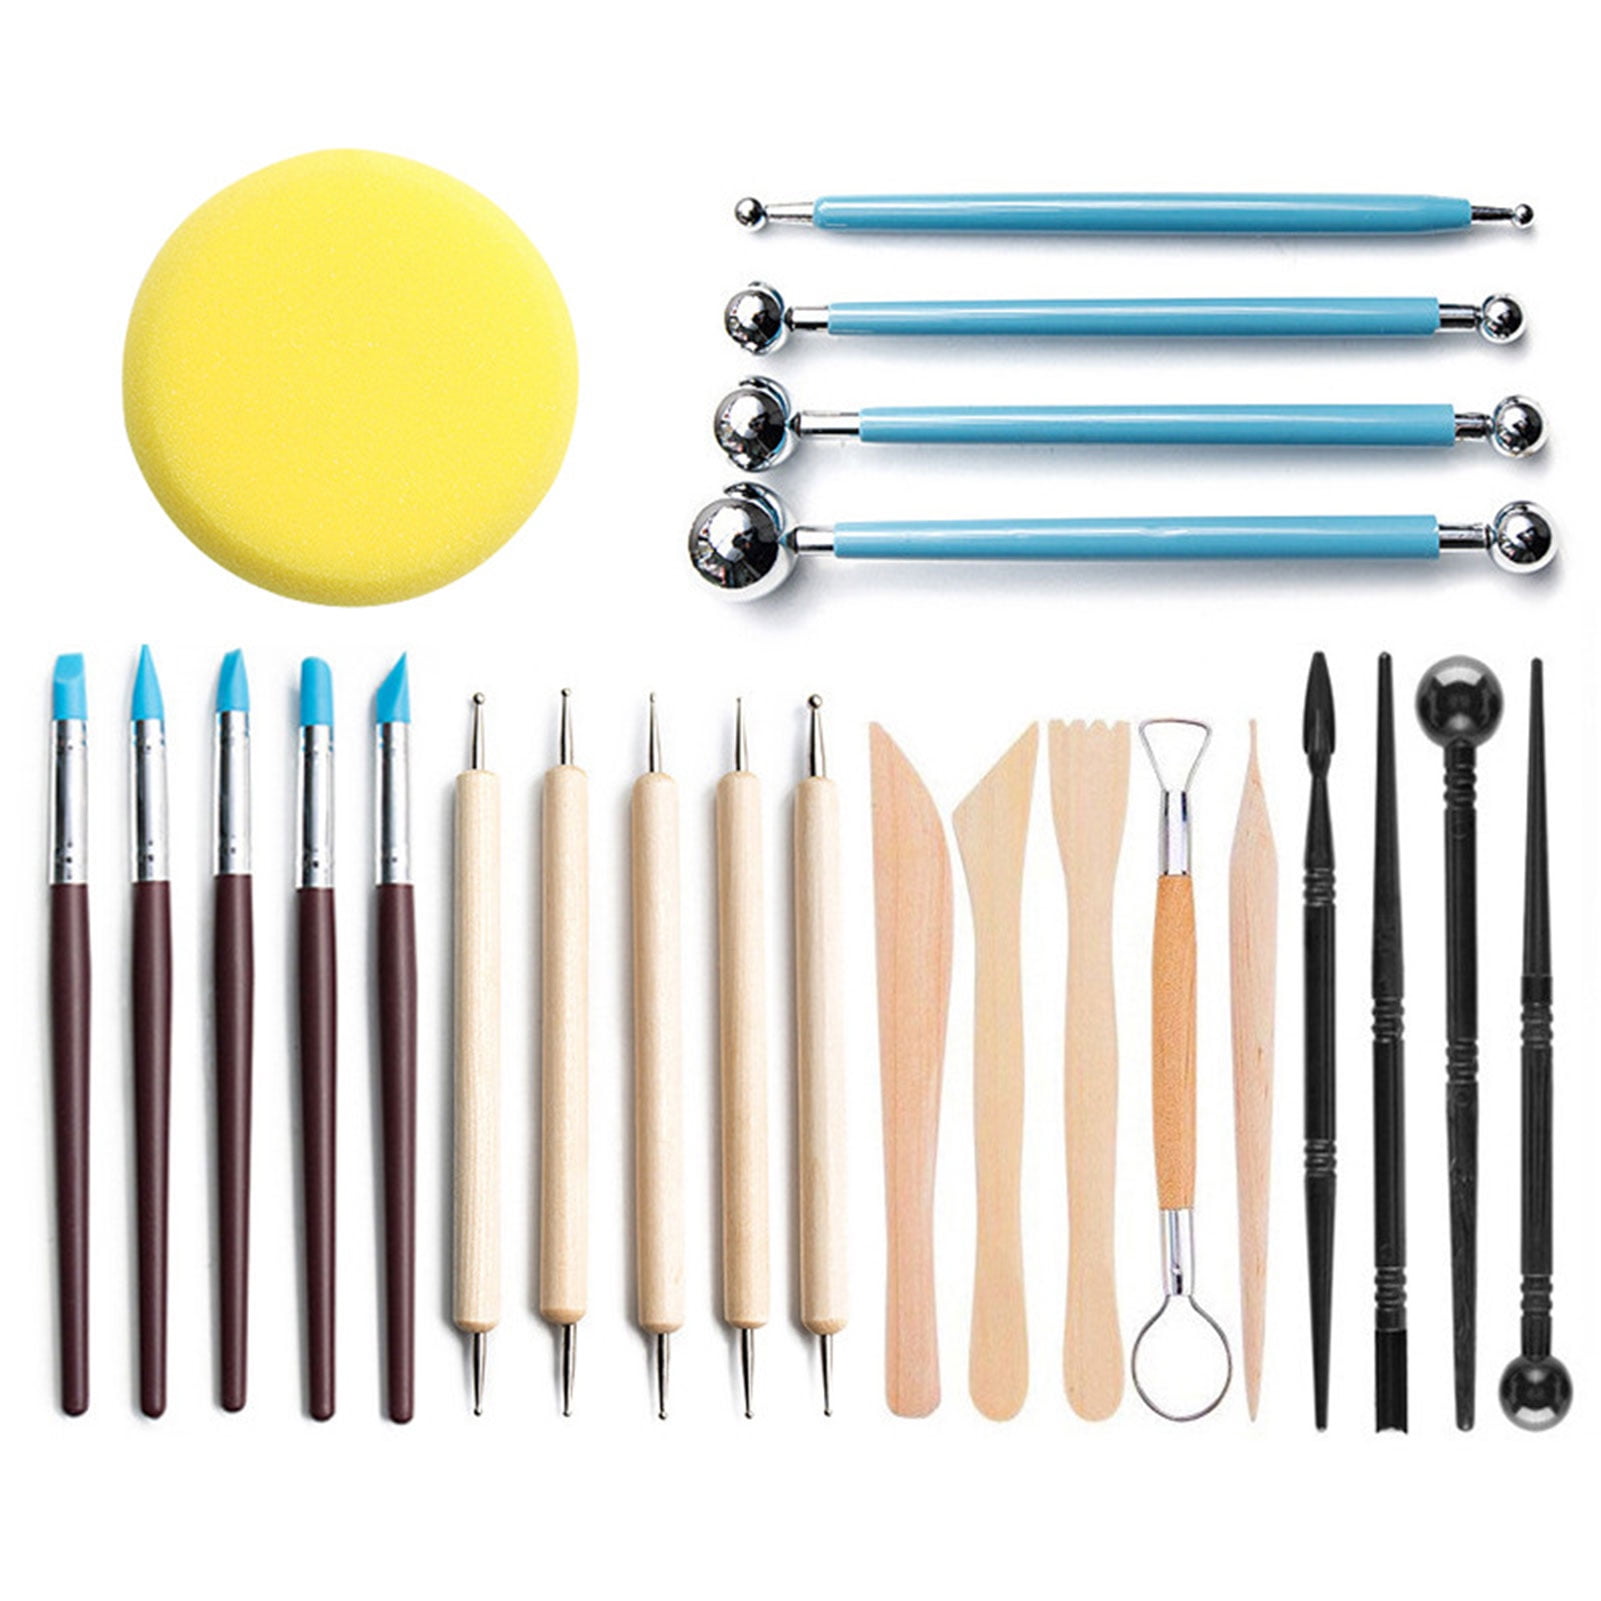 Tools for modeling and giving shape. Sugar craft Pottery and Fondant Sculpting Tools for Art Craft Polymer Clay